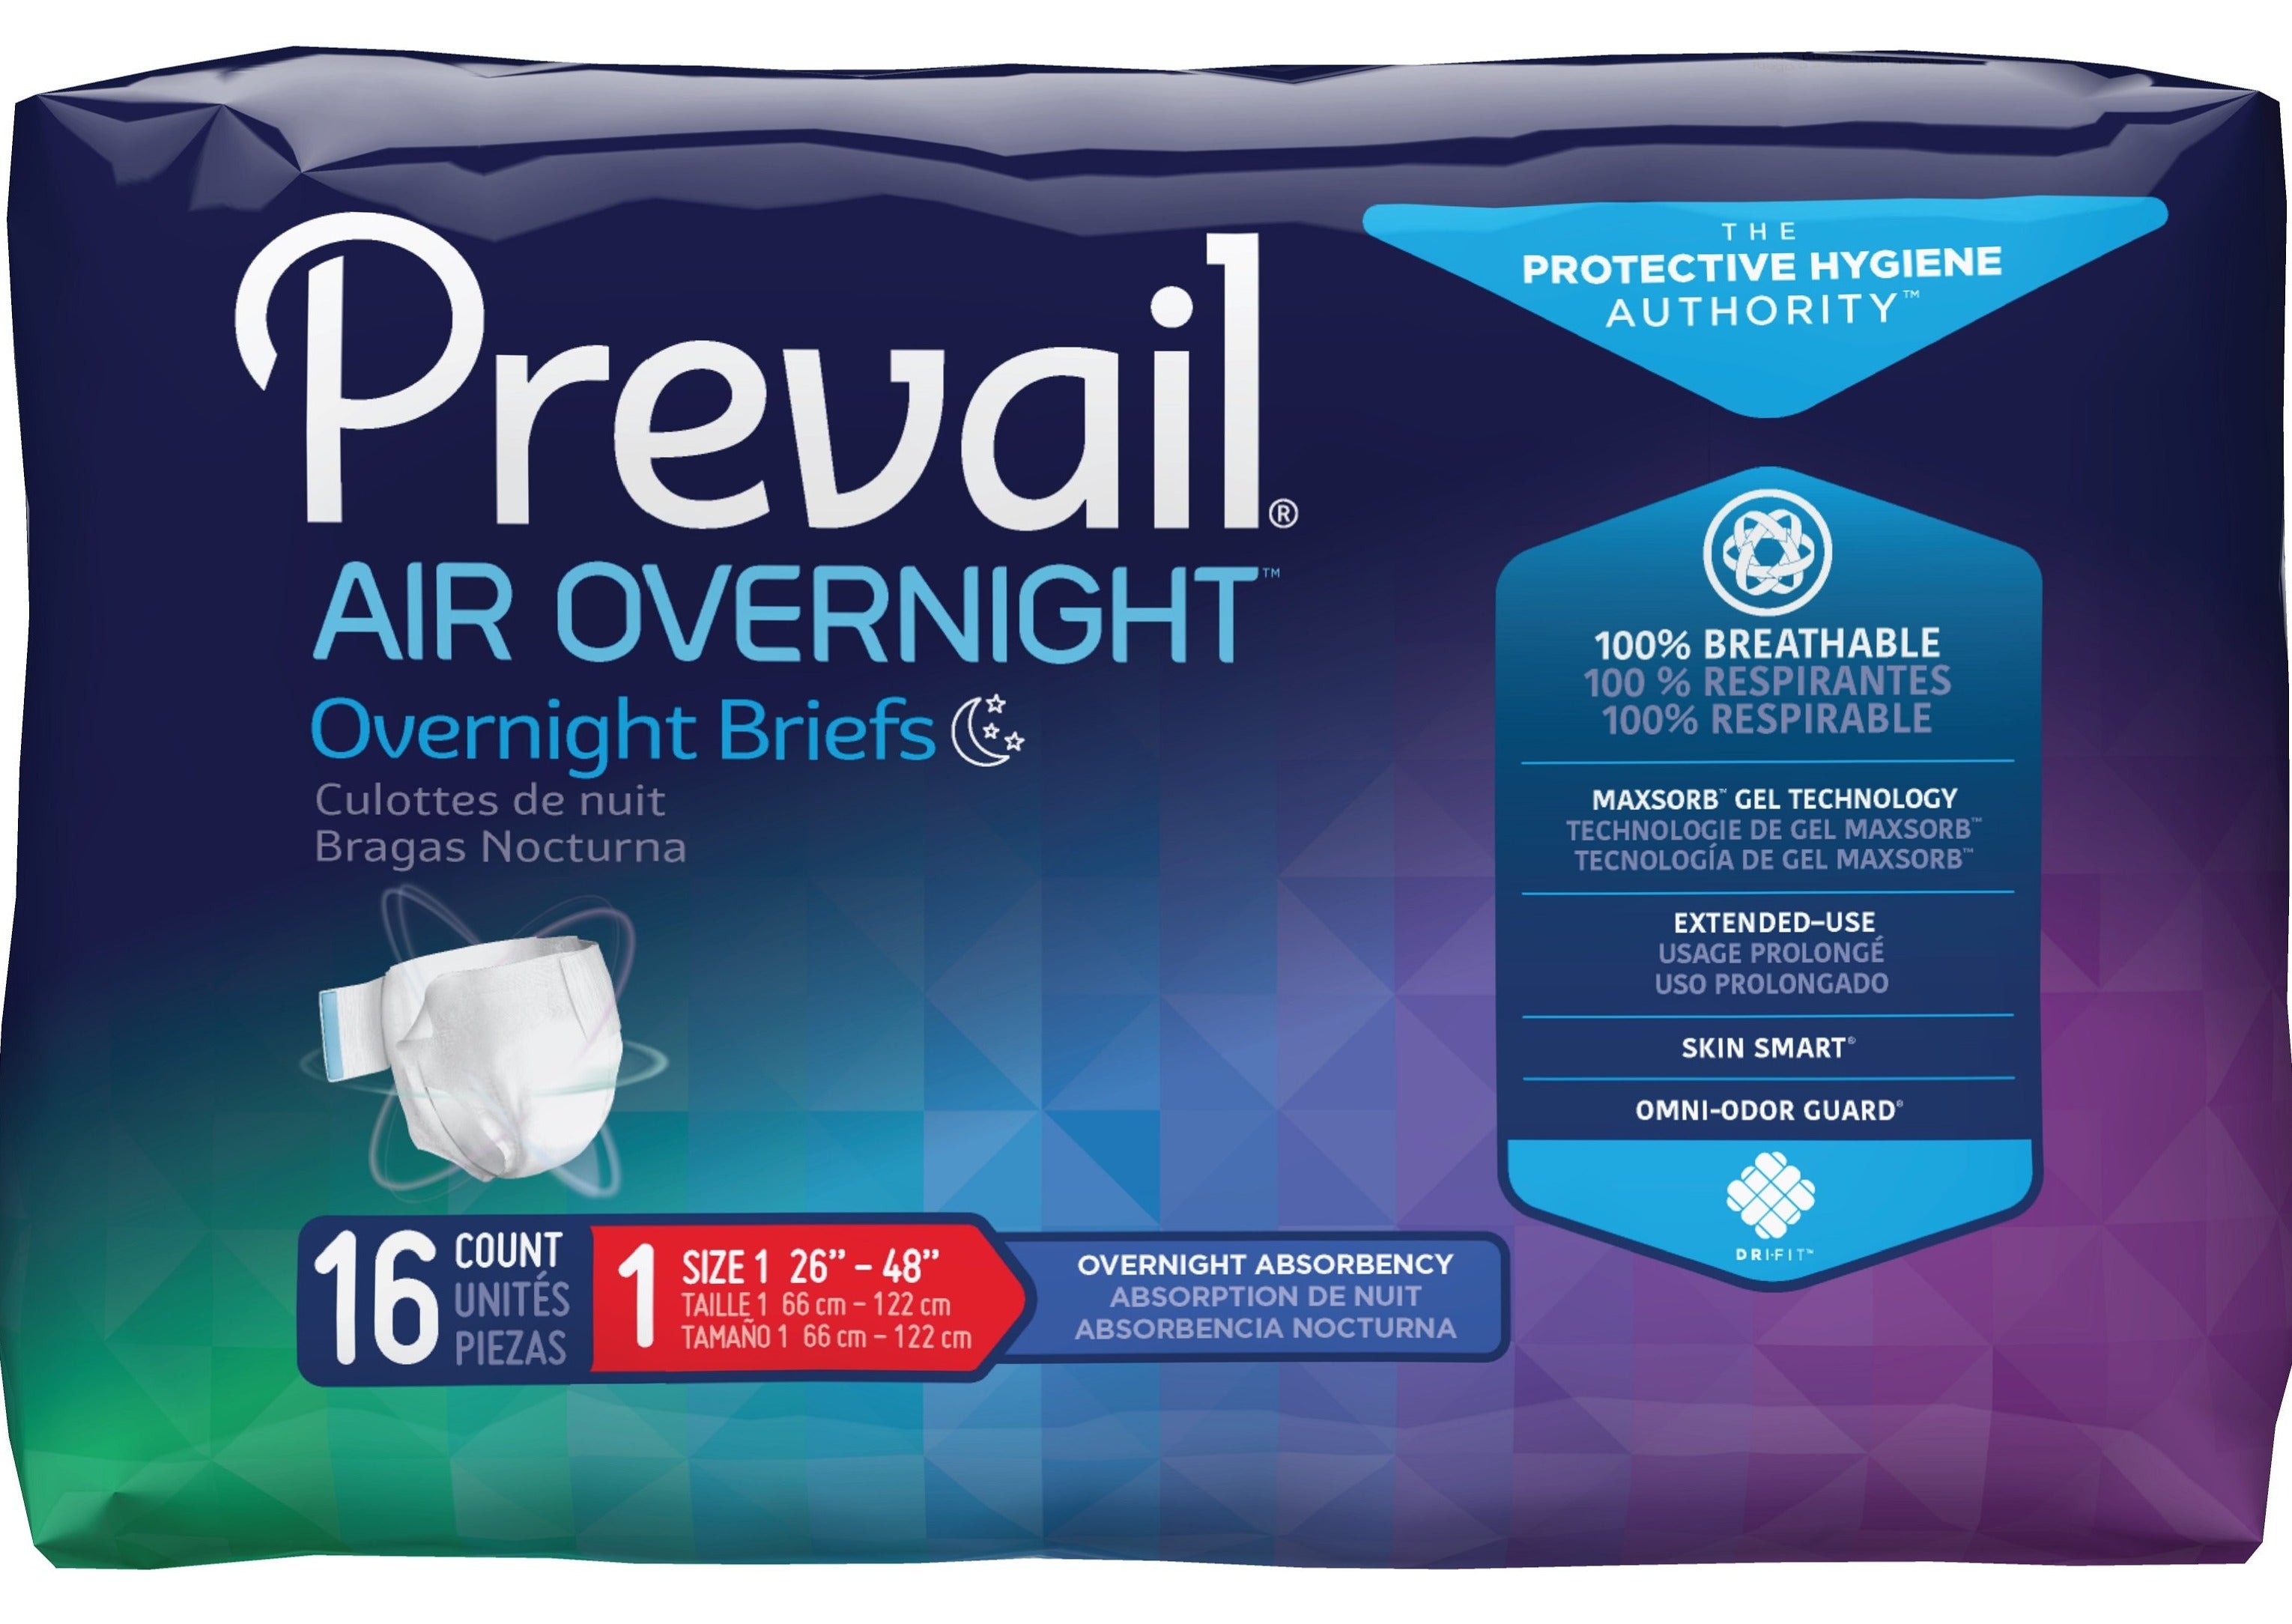 Prevail Per Fit for Men Adult Incontinence Pullup Diaper